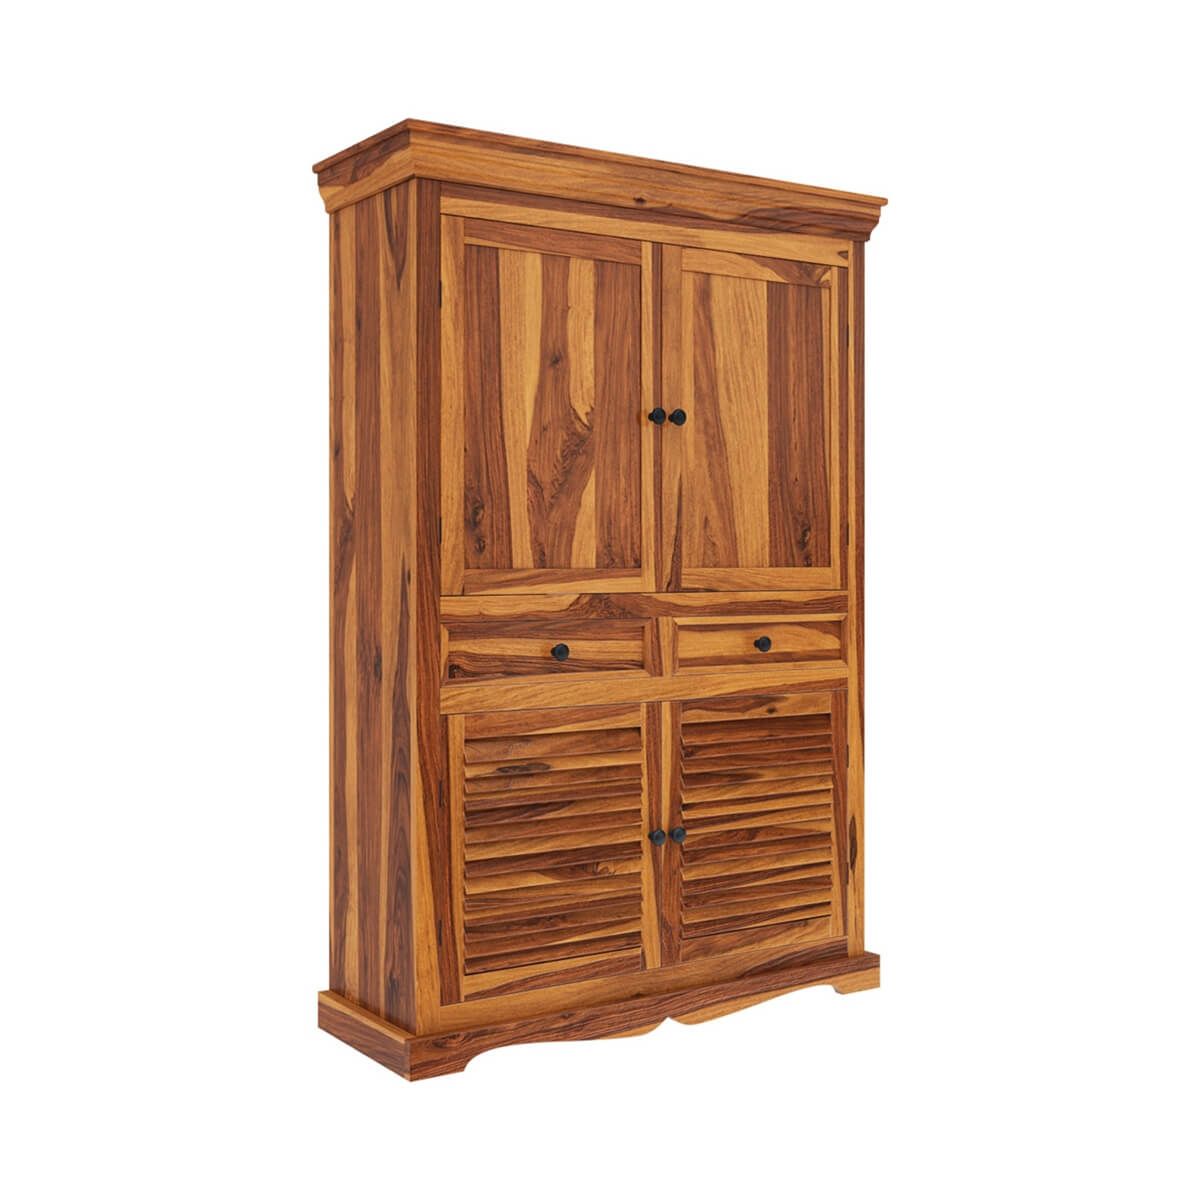 Tanay Louvered Doors Rustic Large Solid Wood Tv Armoire Throughout Wood Tv Armoire (View 15 of 15)